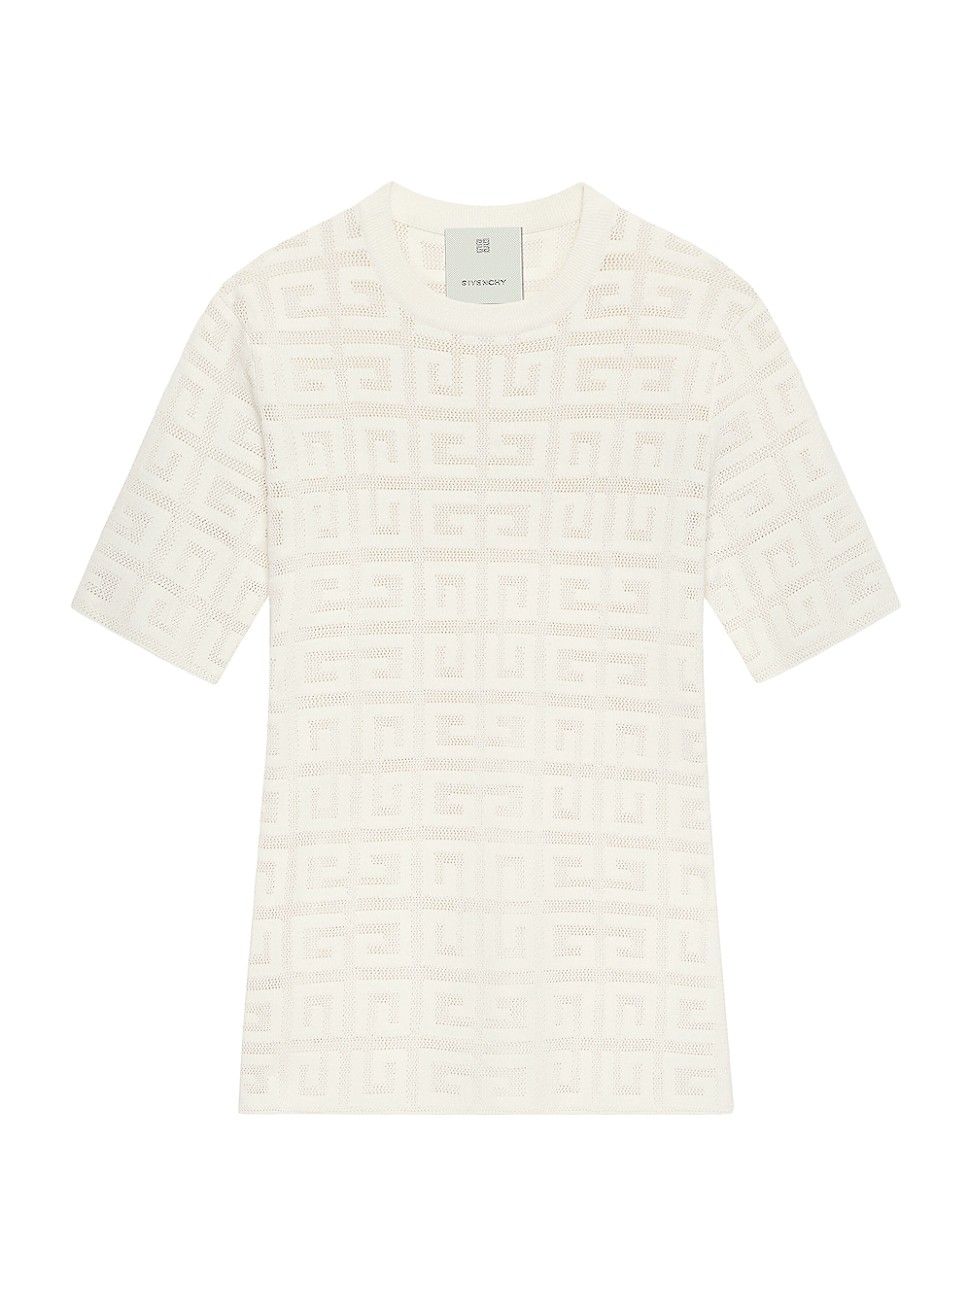 Women's Sweater In 4G Jacquard With Short Sleeves - Off White - Size Medium | Saks Fifth Avenue